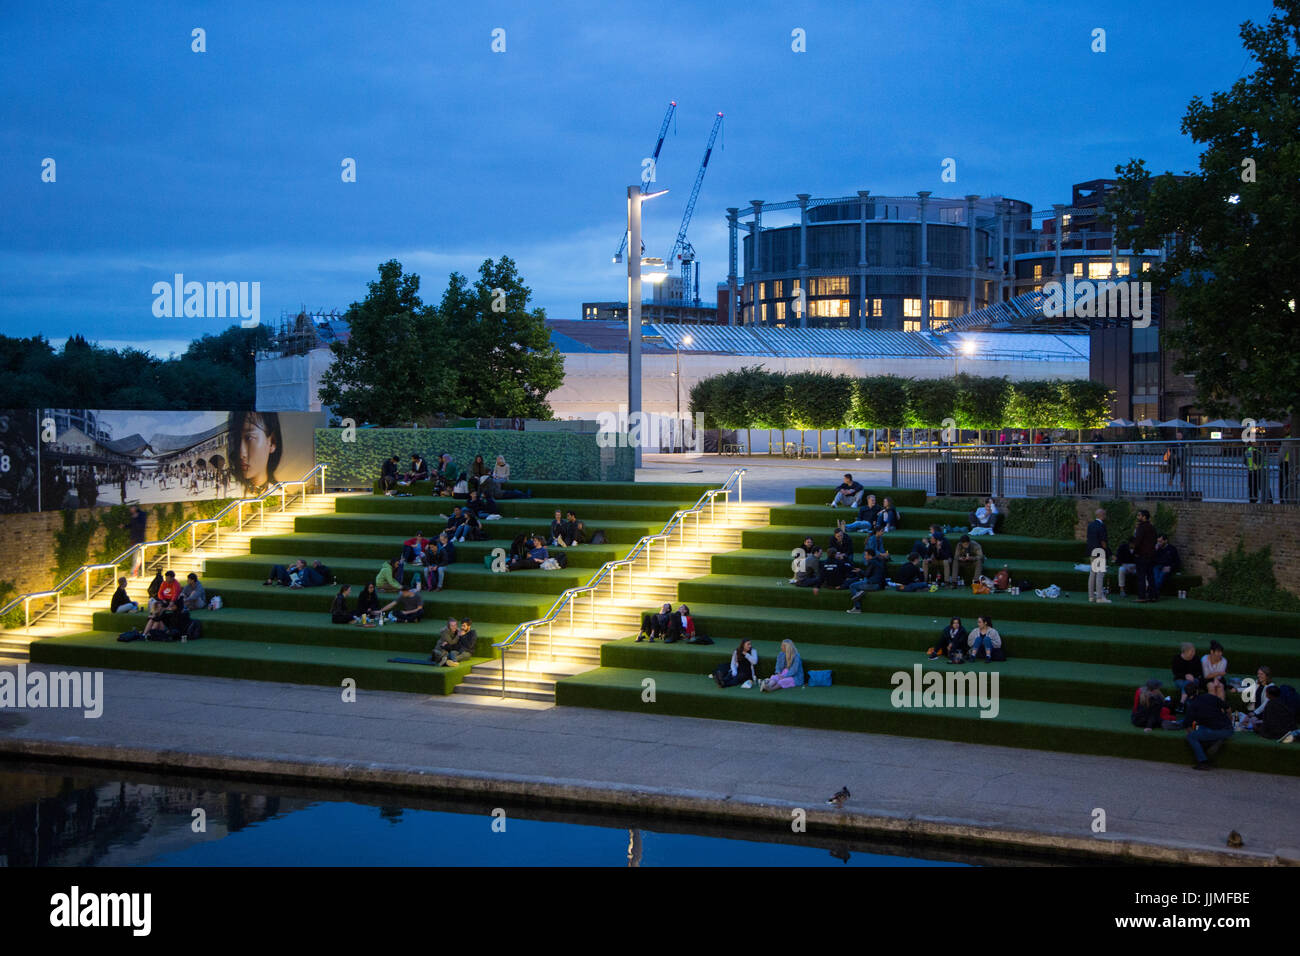 Londoners enjoying a warm summer night by the Grand Union Canal in Kings Cross, outside Granary Square Stock Photo